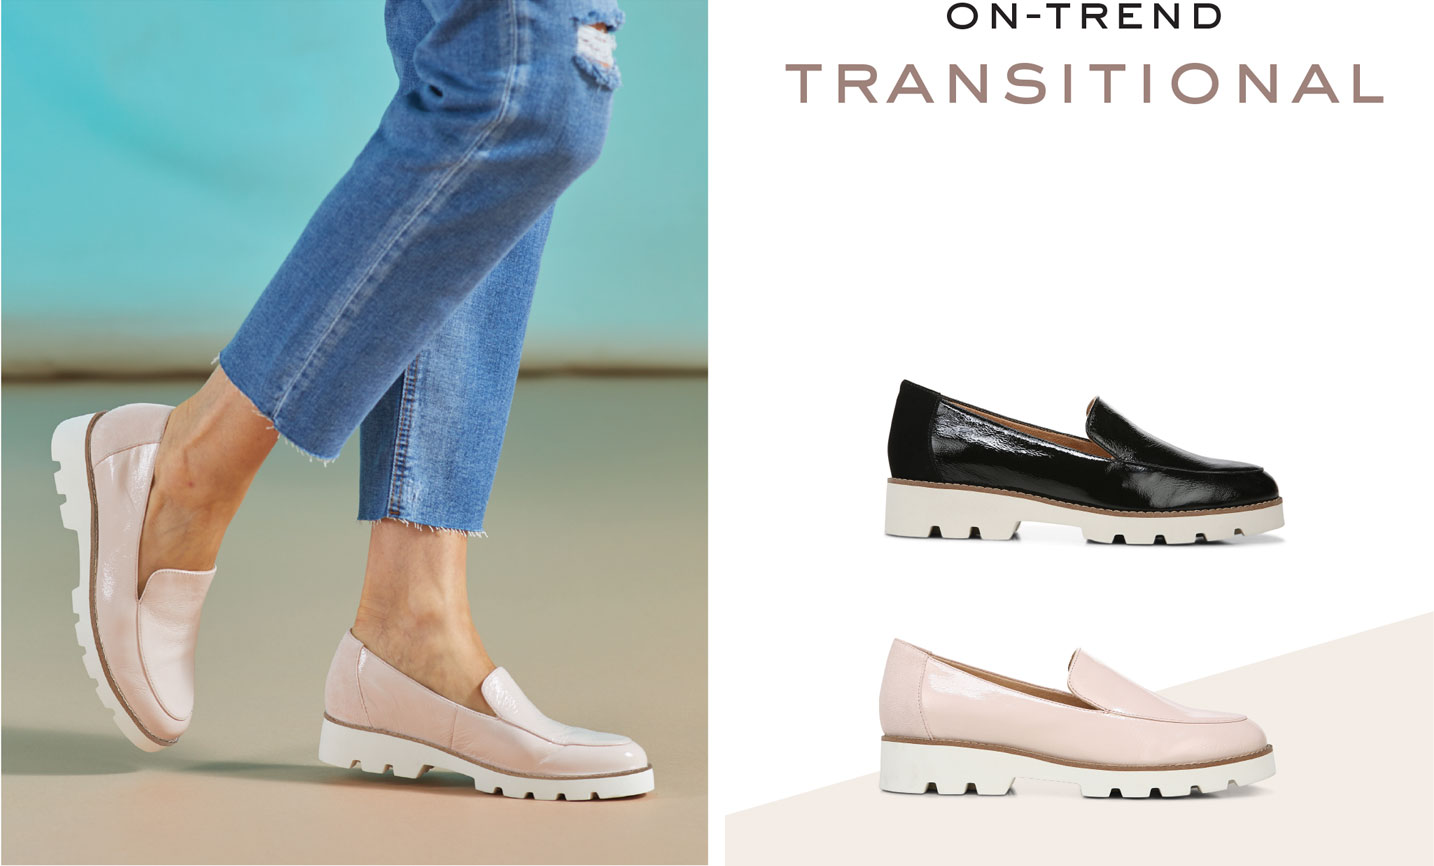 On-Trend Transitional - Women's Flats & Loafers